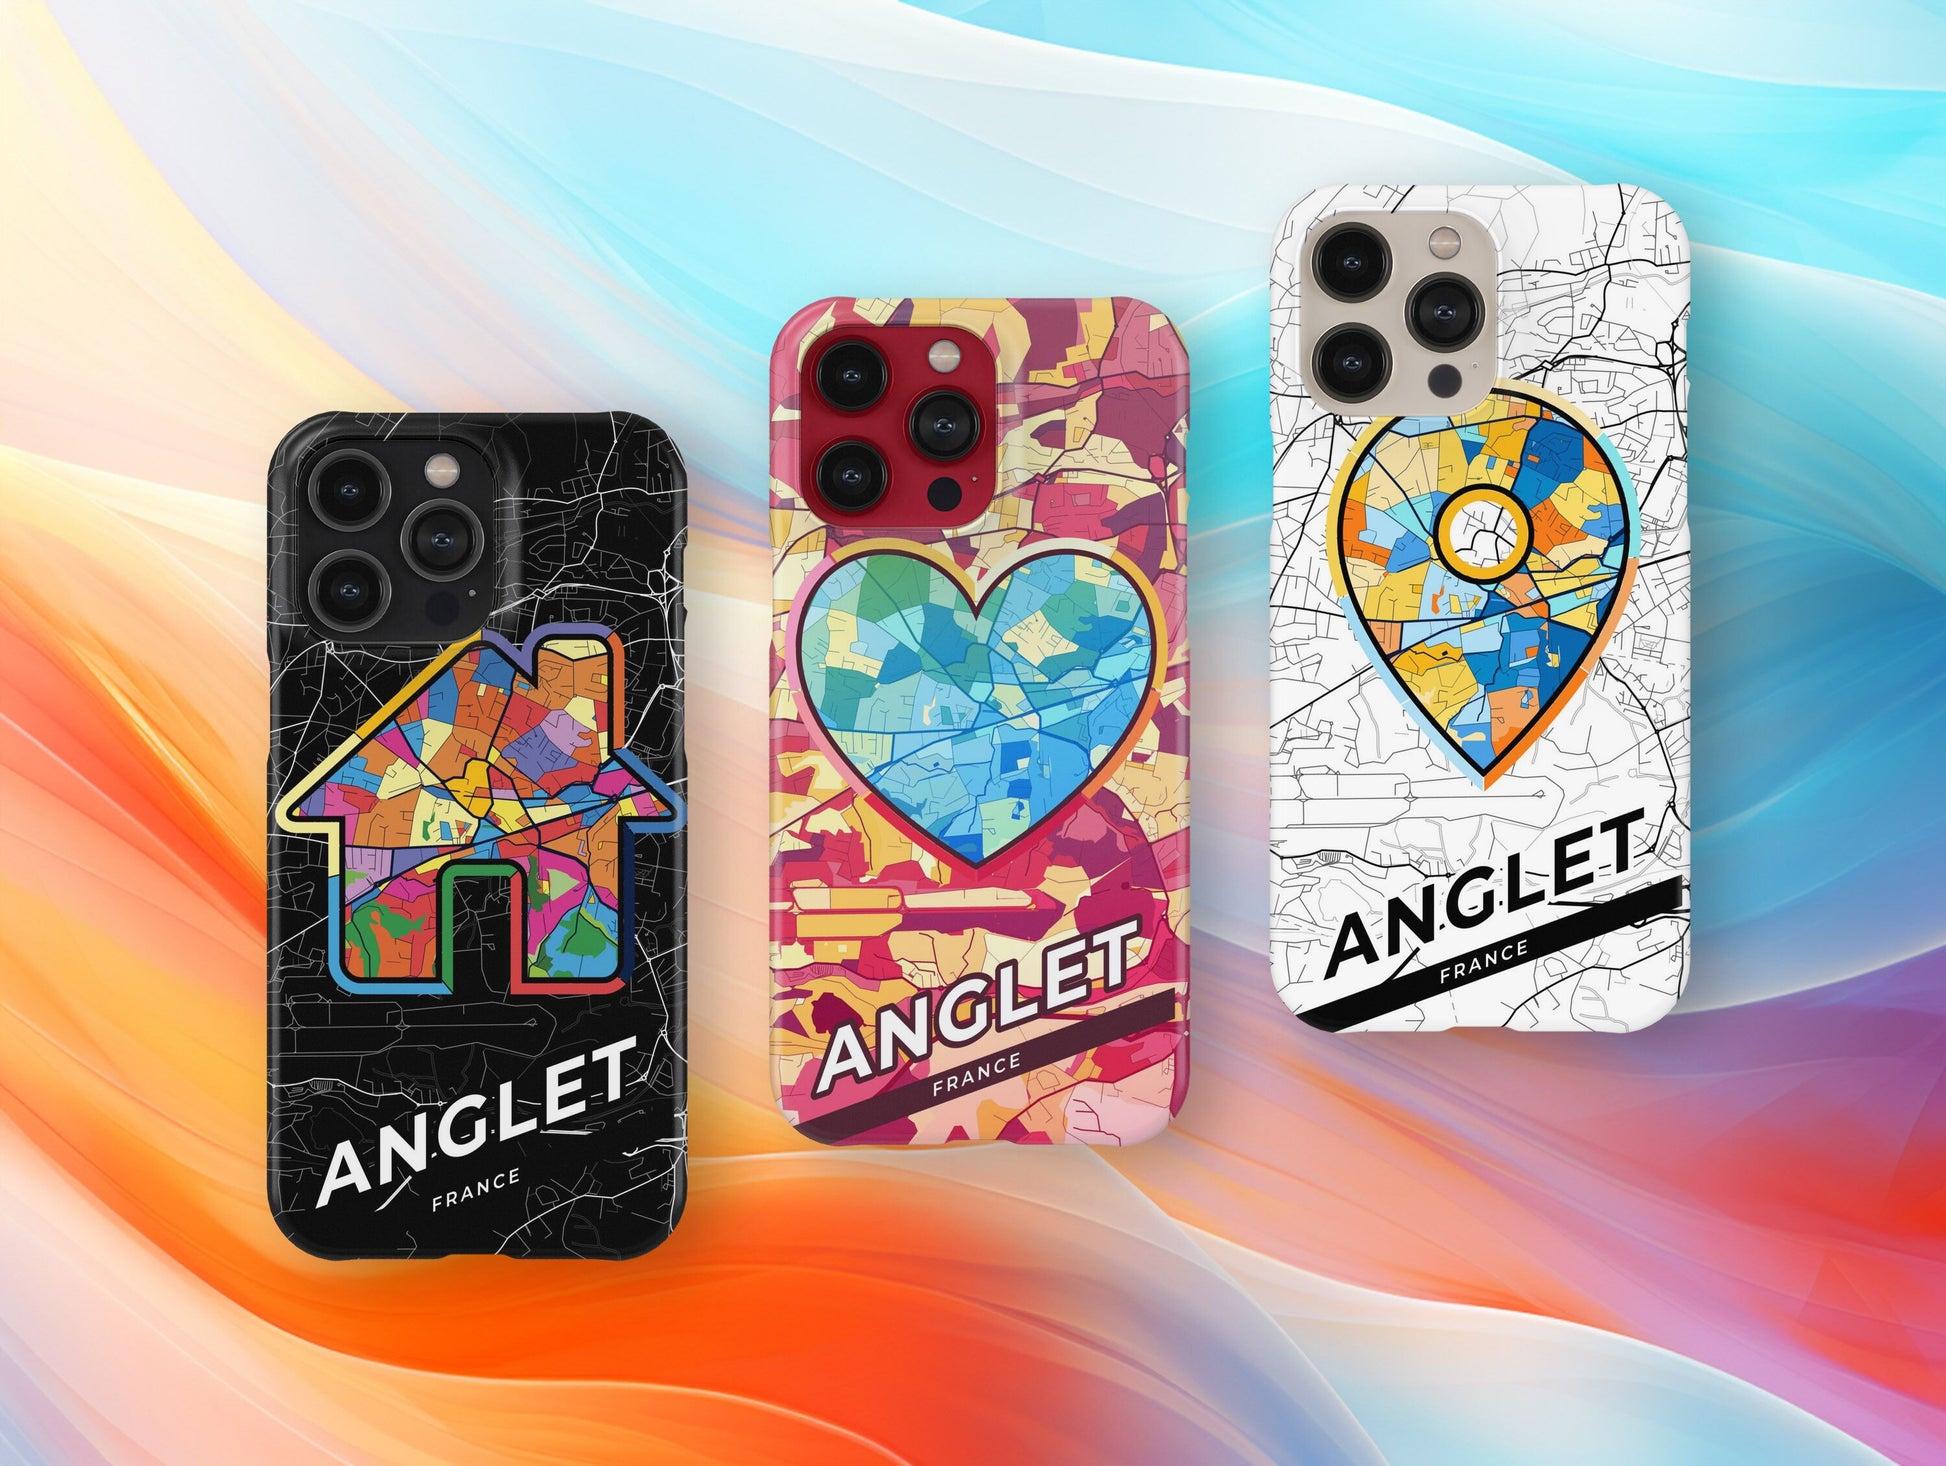 Anglet France slim phone case with colorful icon. Birthday, wedding or housewarming gift. Couple match cases.